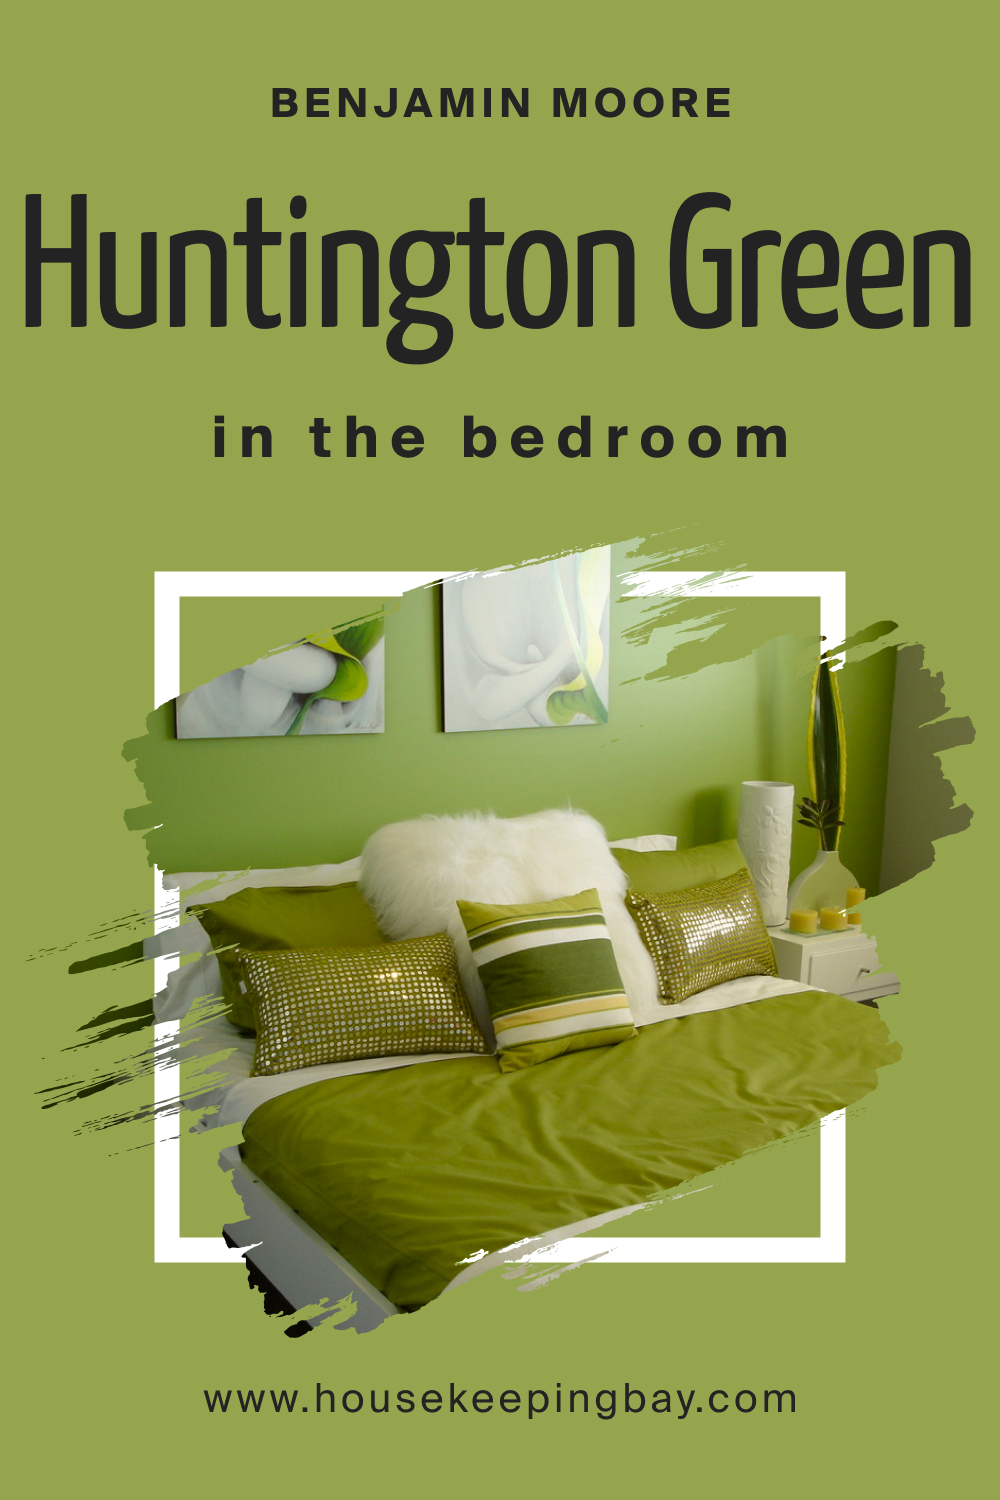 How to Use Huntington Green 406 in the Bedroom?